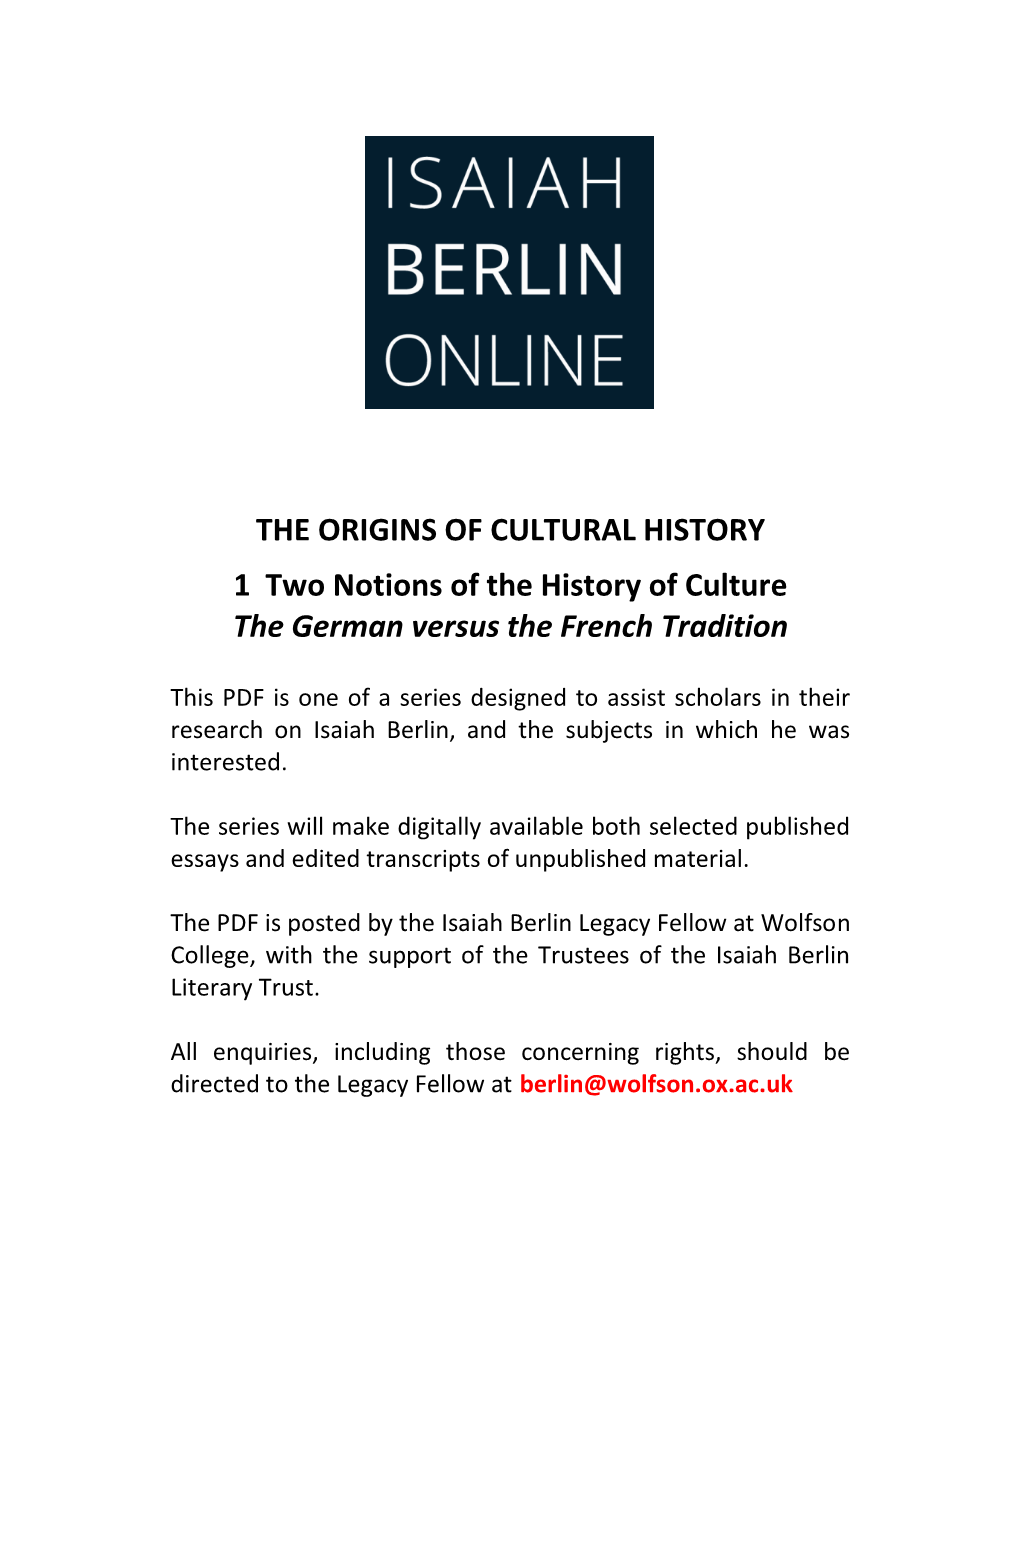 THE ORIGINS of CULTURAL HISTORY 1 Two Notions of the History of Culture the German Versus the French Tradition